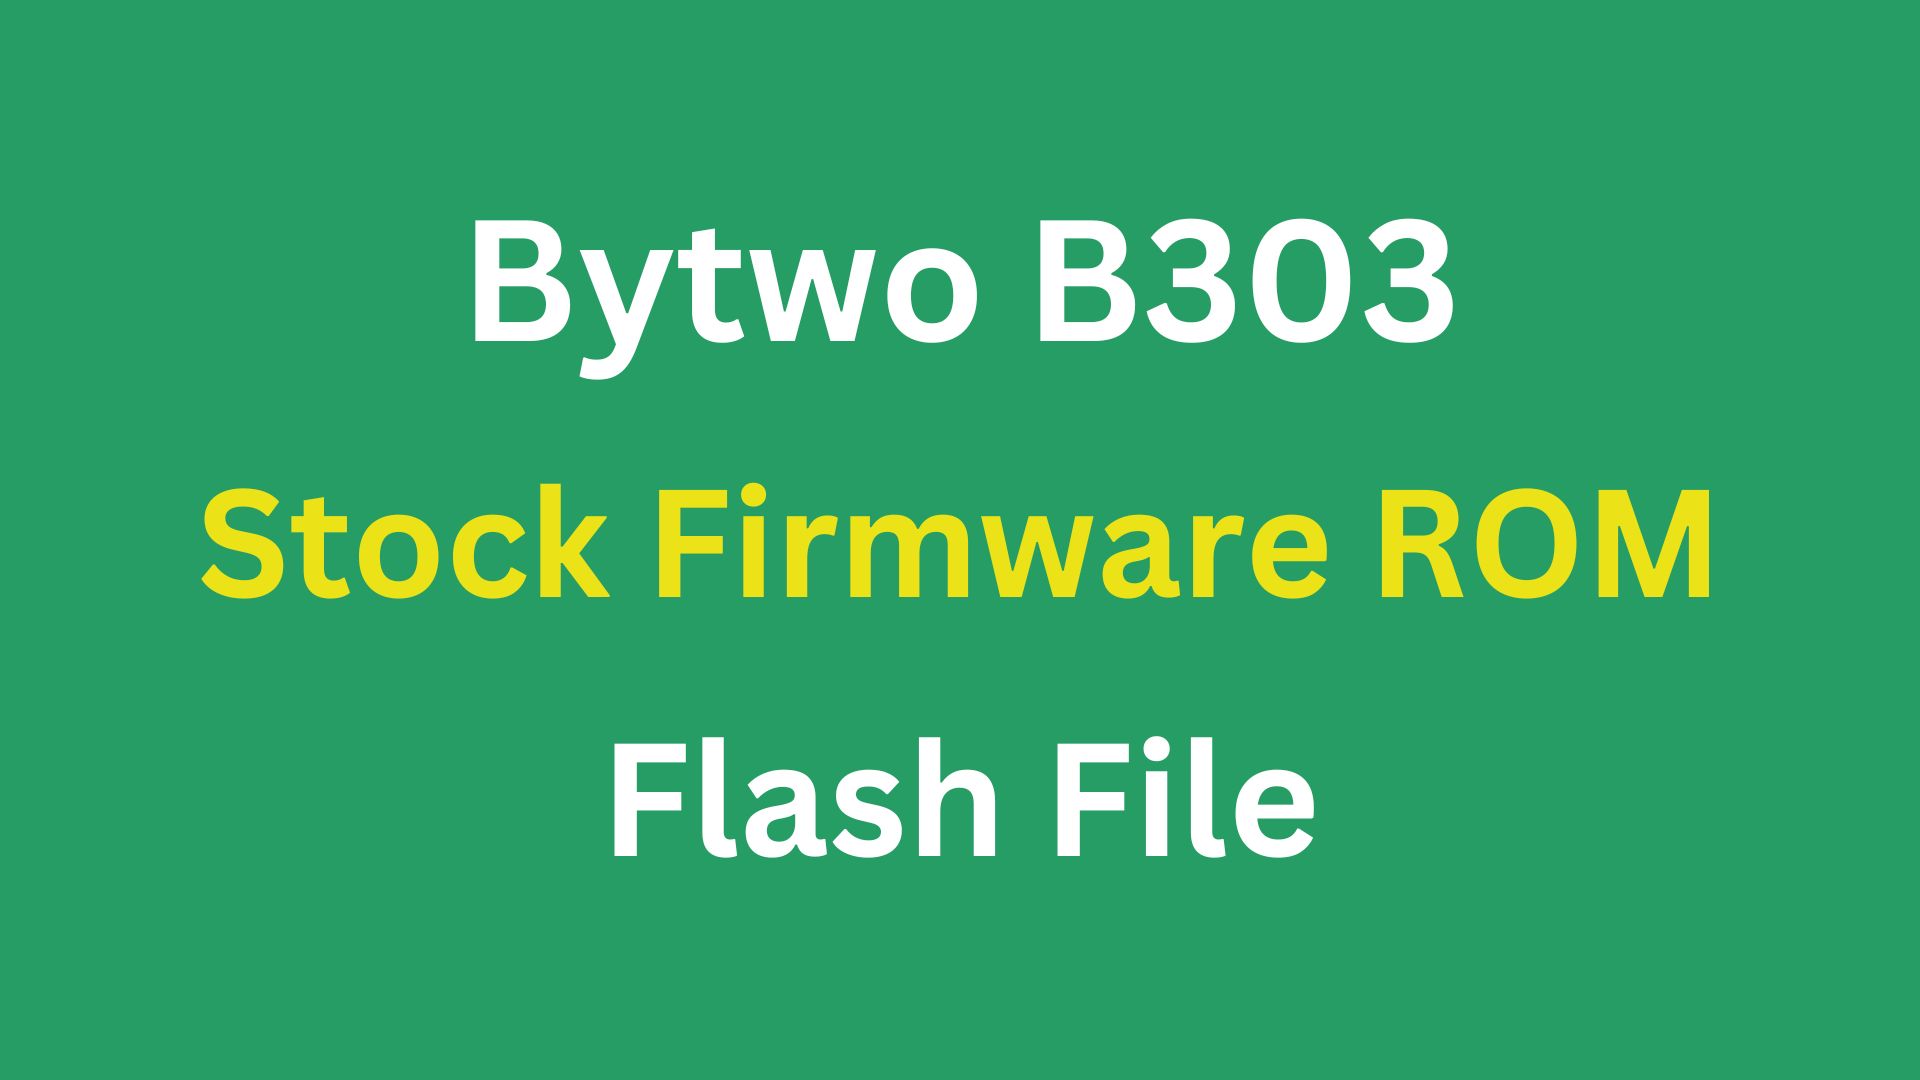 Bytwo B303 Stock Firmware ROM (Flash File)